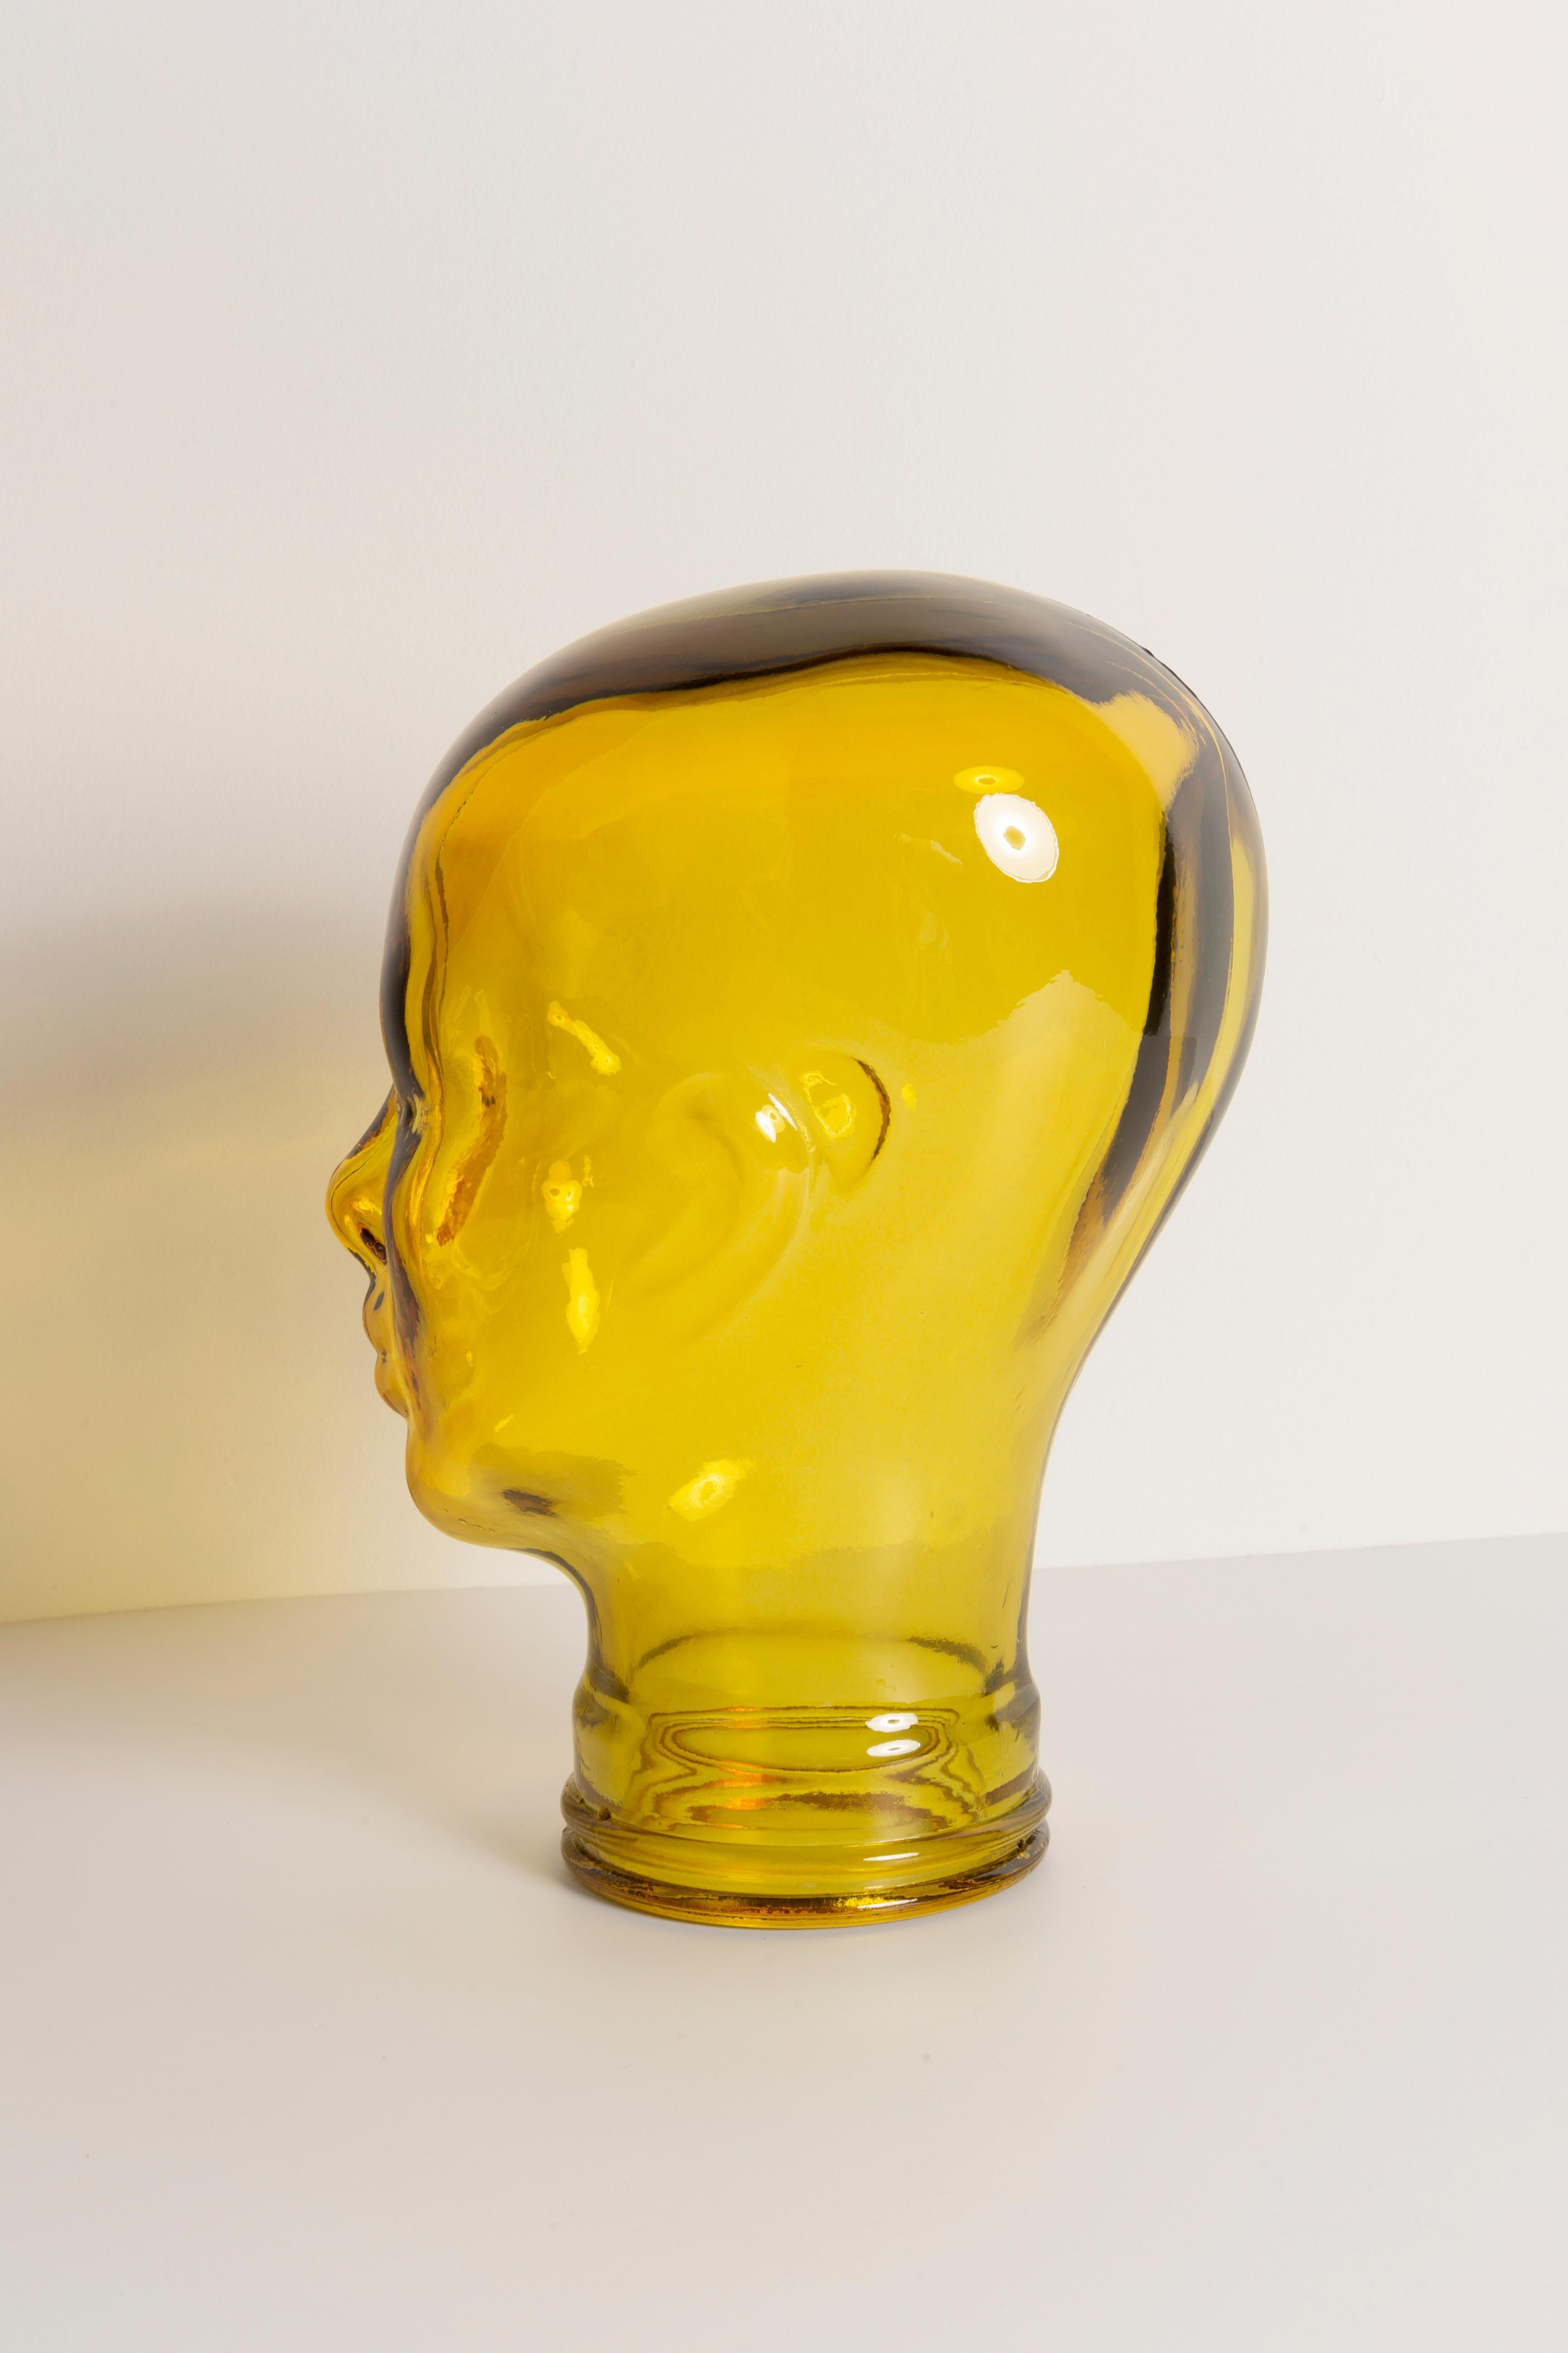 Yellow Vintage Decorative Mannequin Glass Head Sculpture, 1970s, Germany For Sale 2